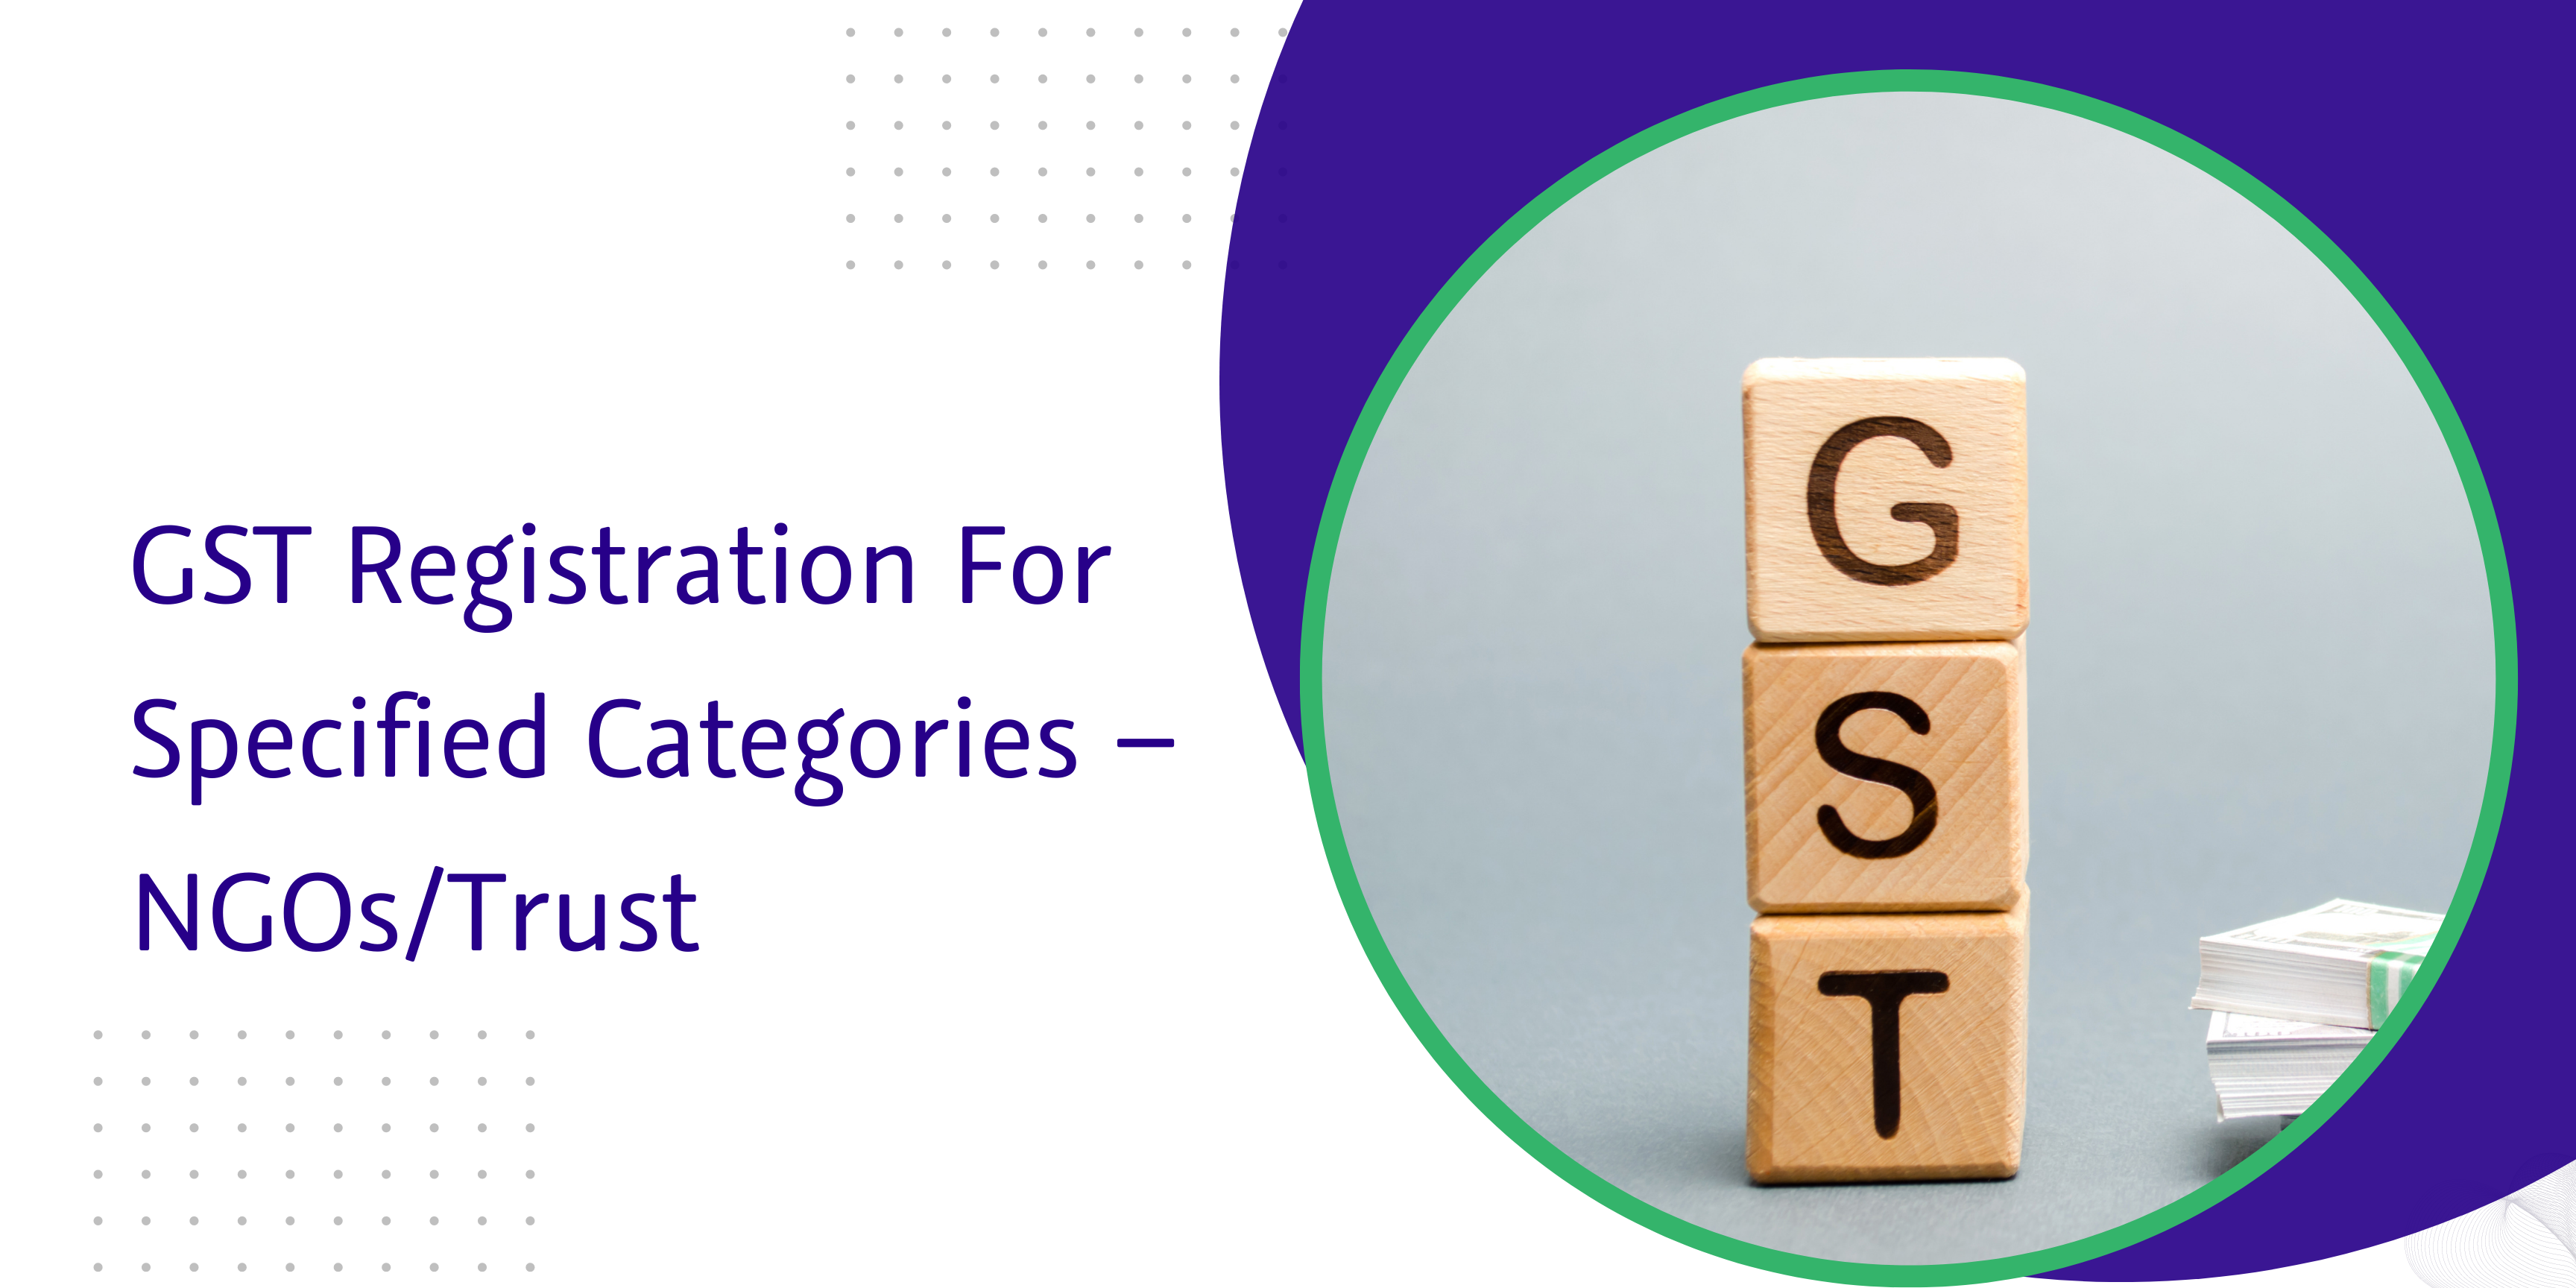 GST Registration For Specified Categories - NGOs/Trust